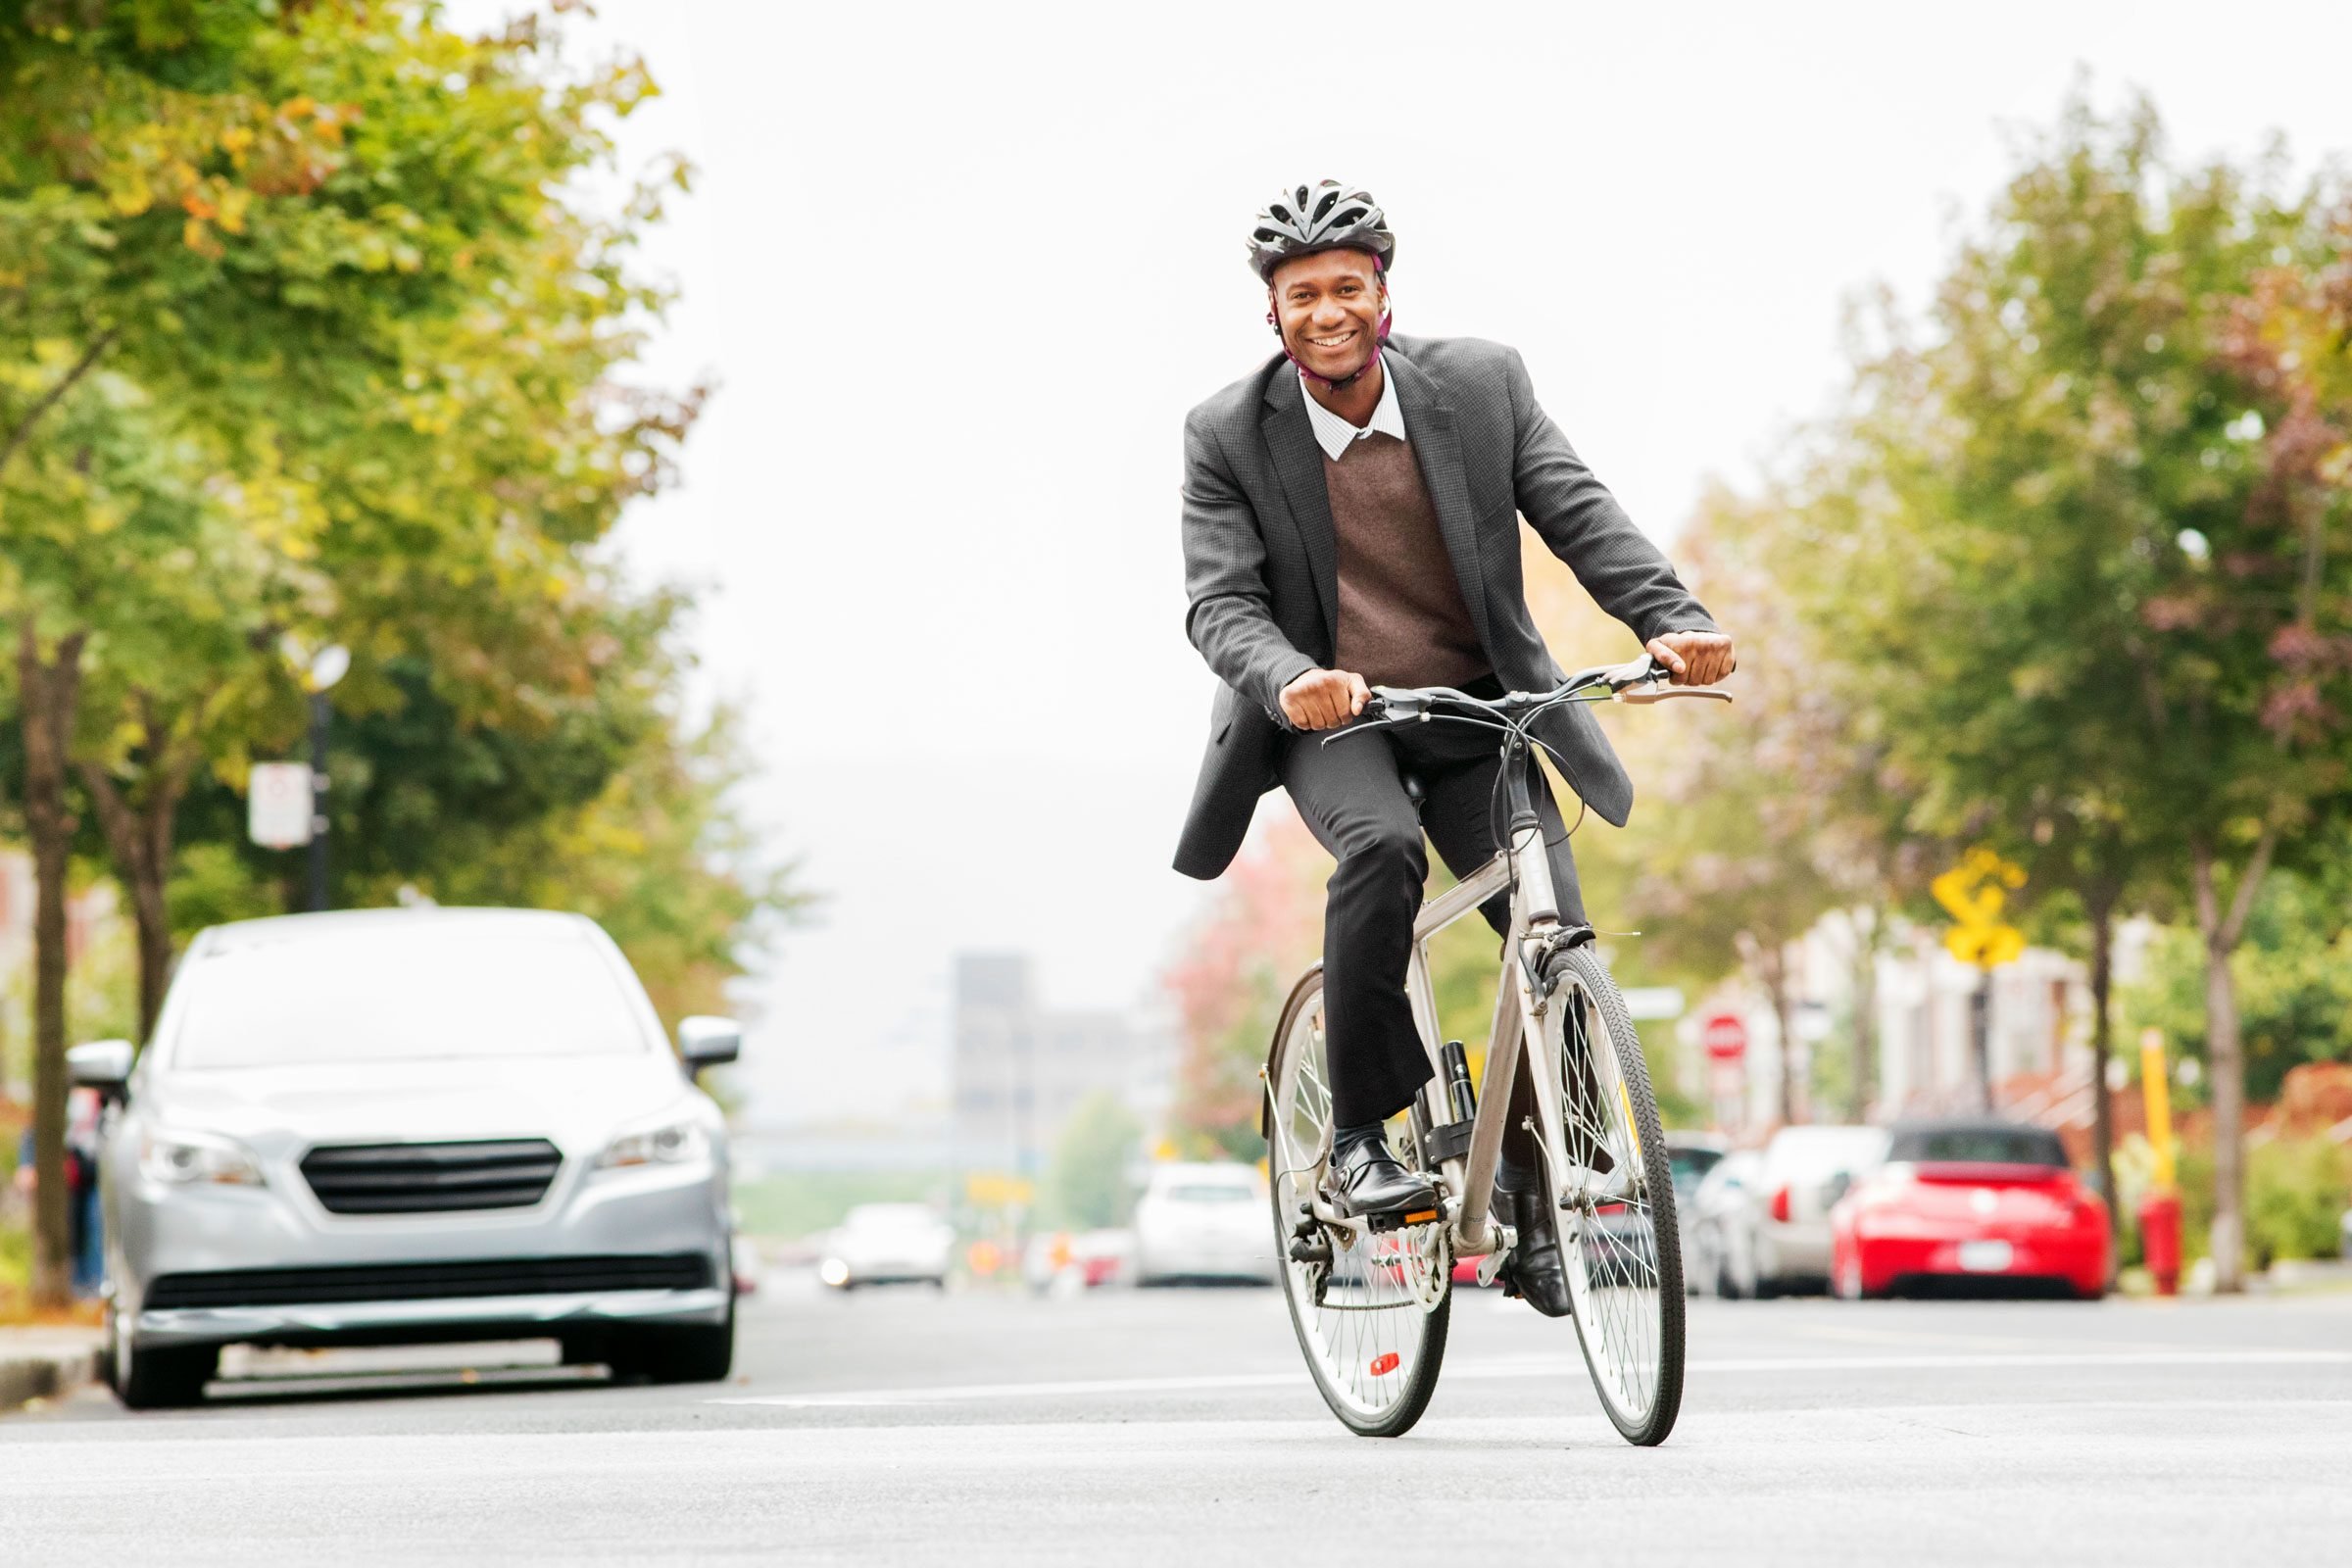 5 Healthy Reasons to Bike Instead of Drive, According to Experts